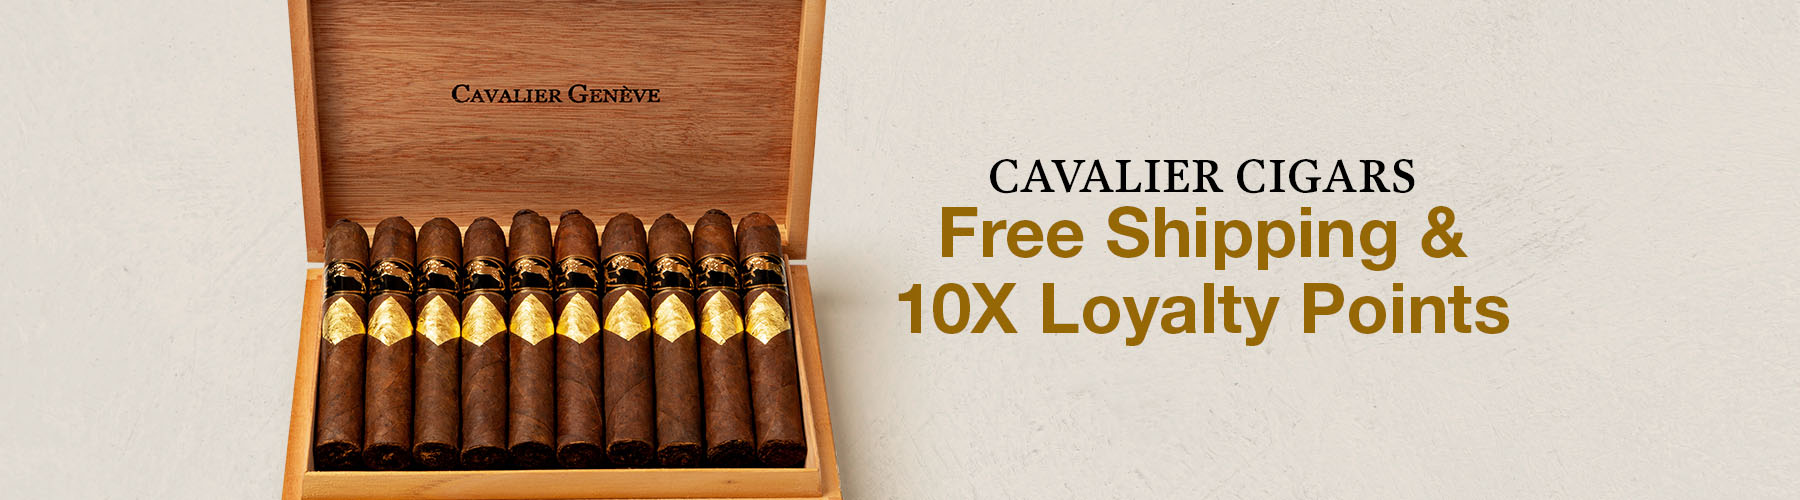 Cavalier Cigars
 free shipping and 10X Loyalty Points